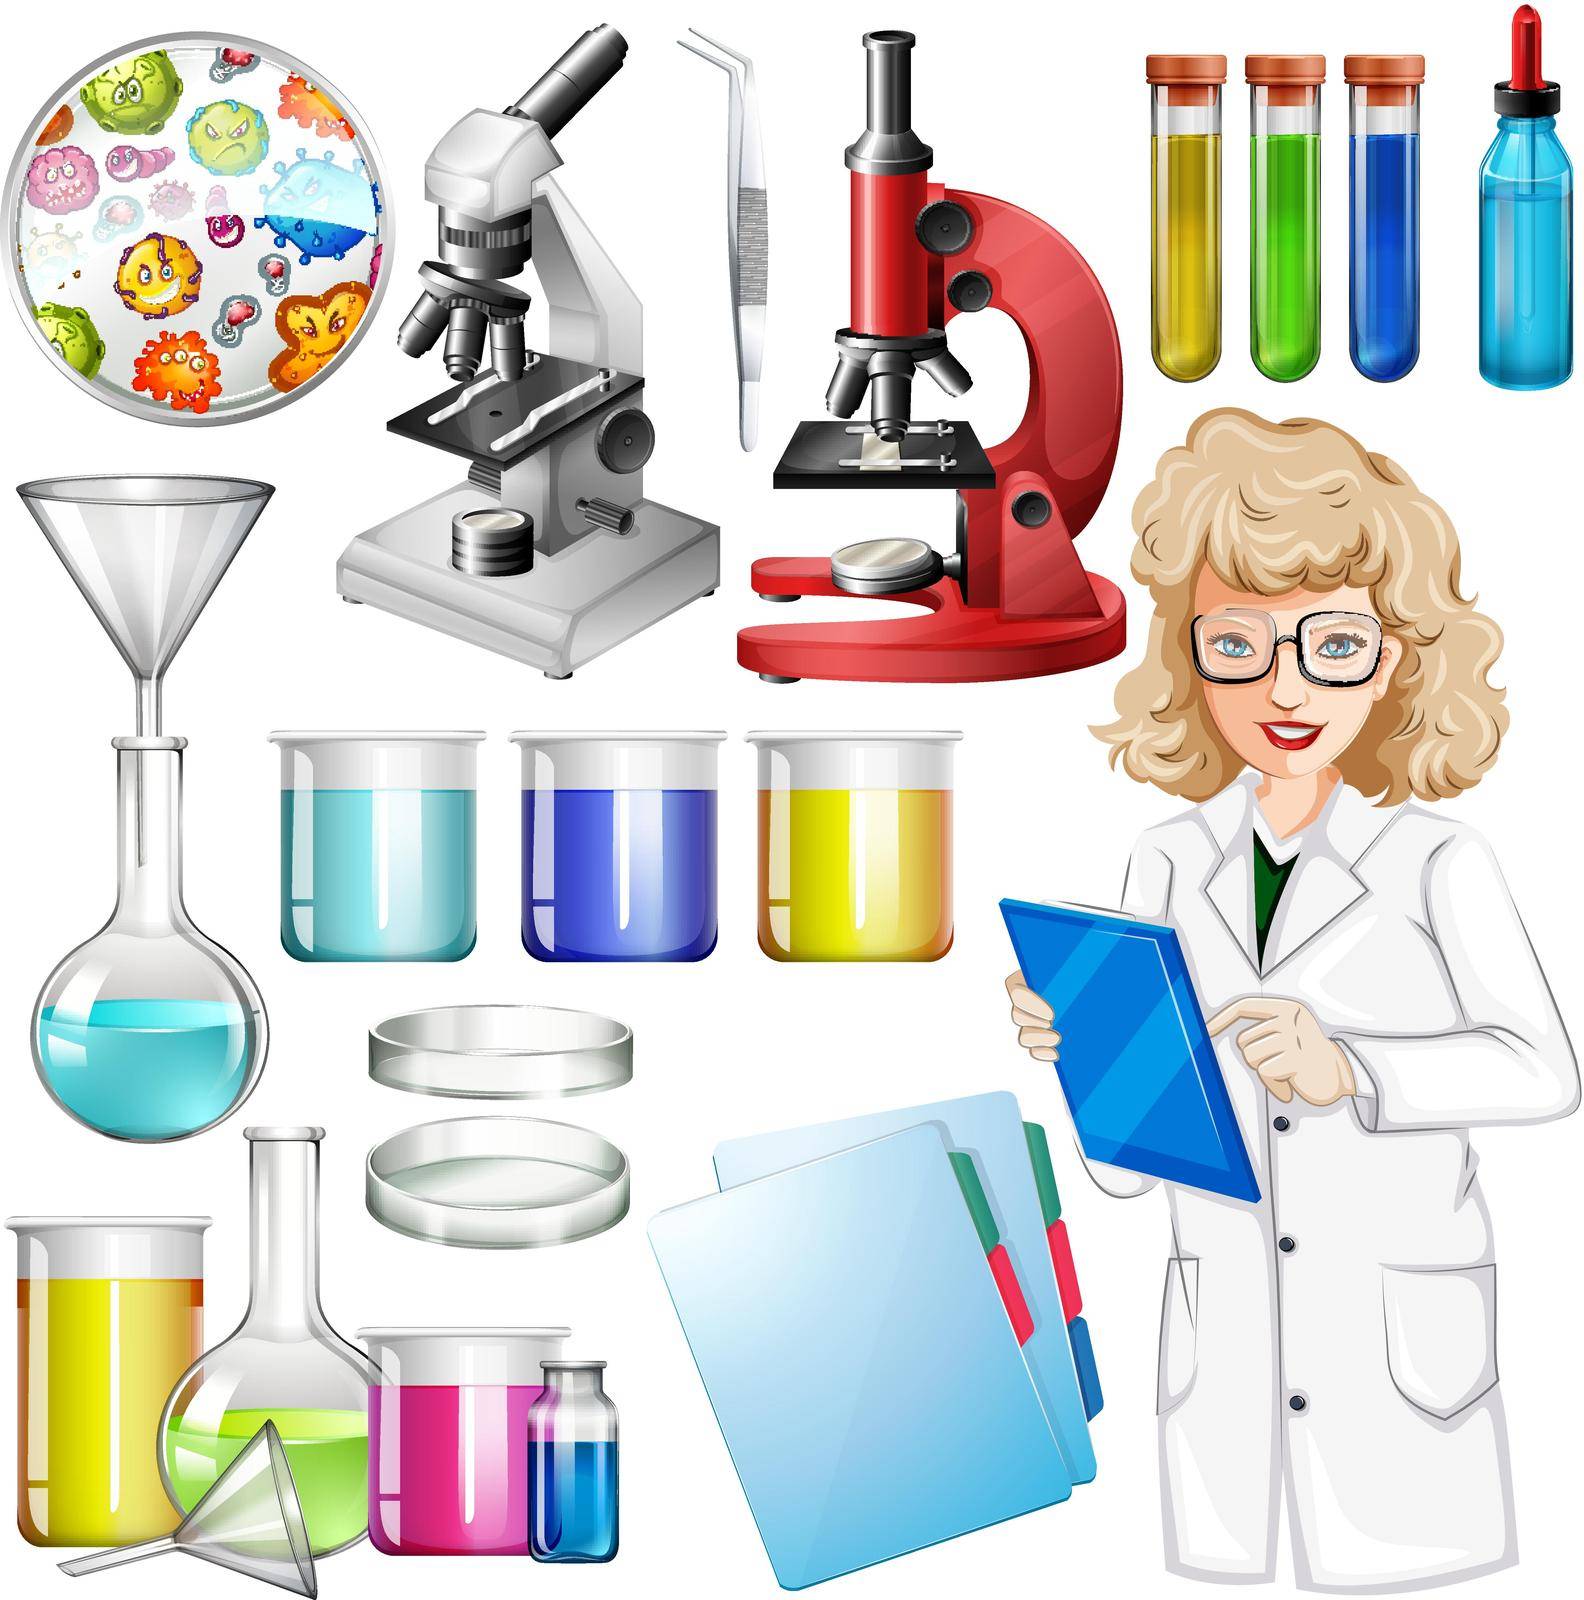 Scientist with science equipment illustration